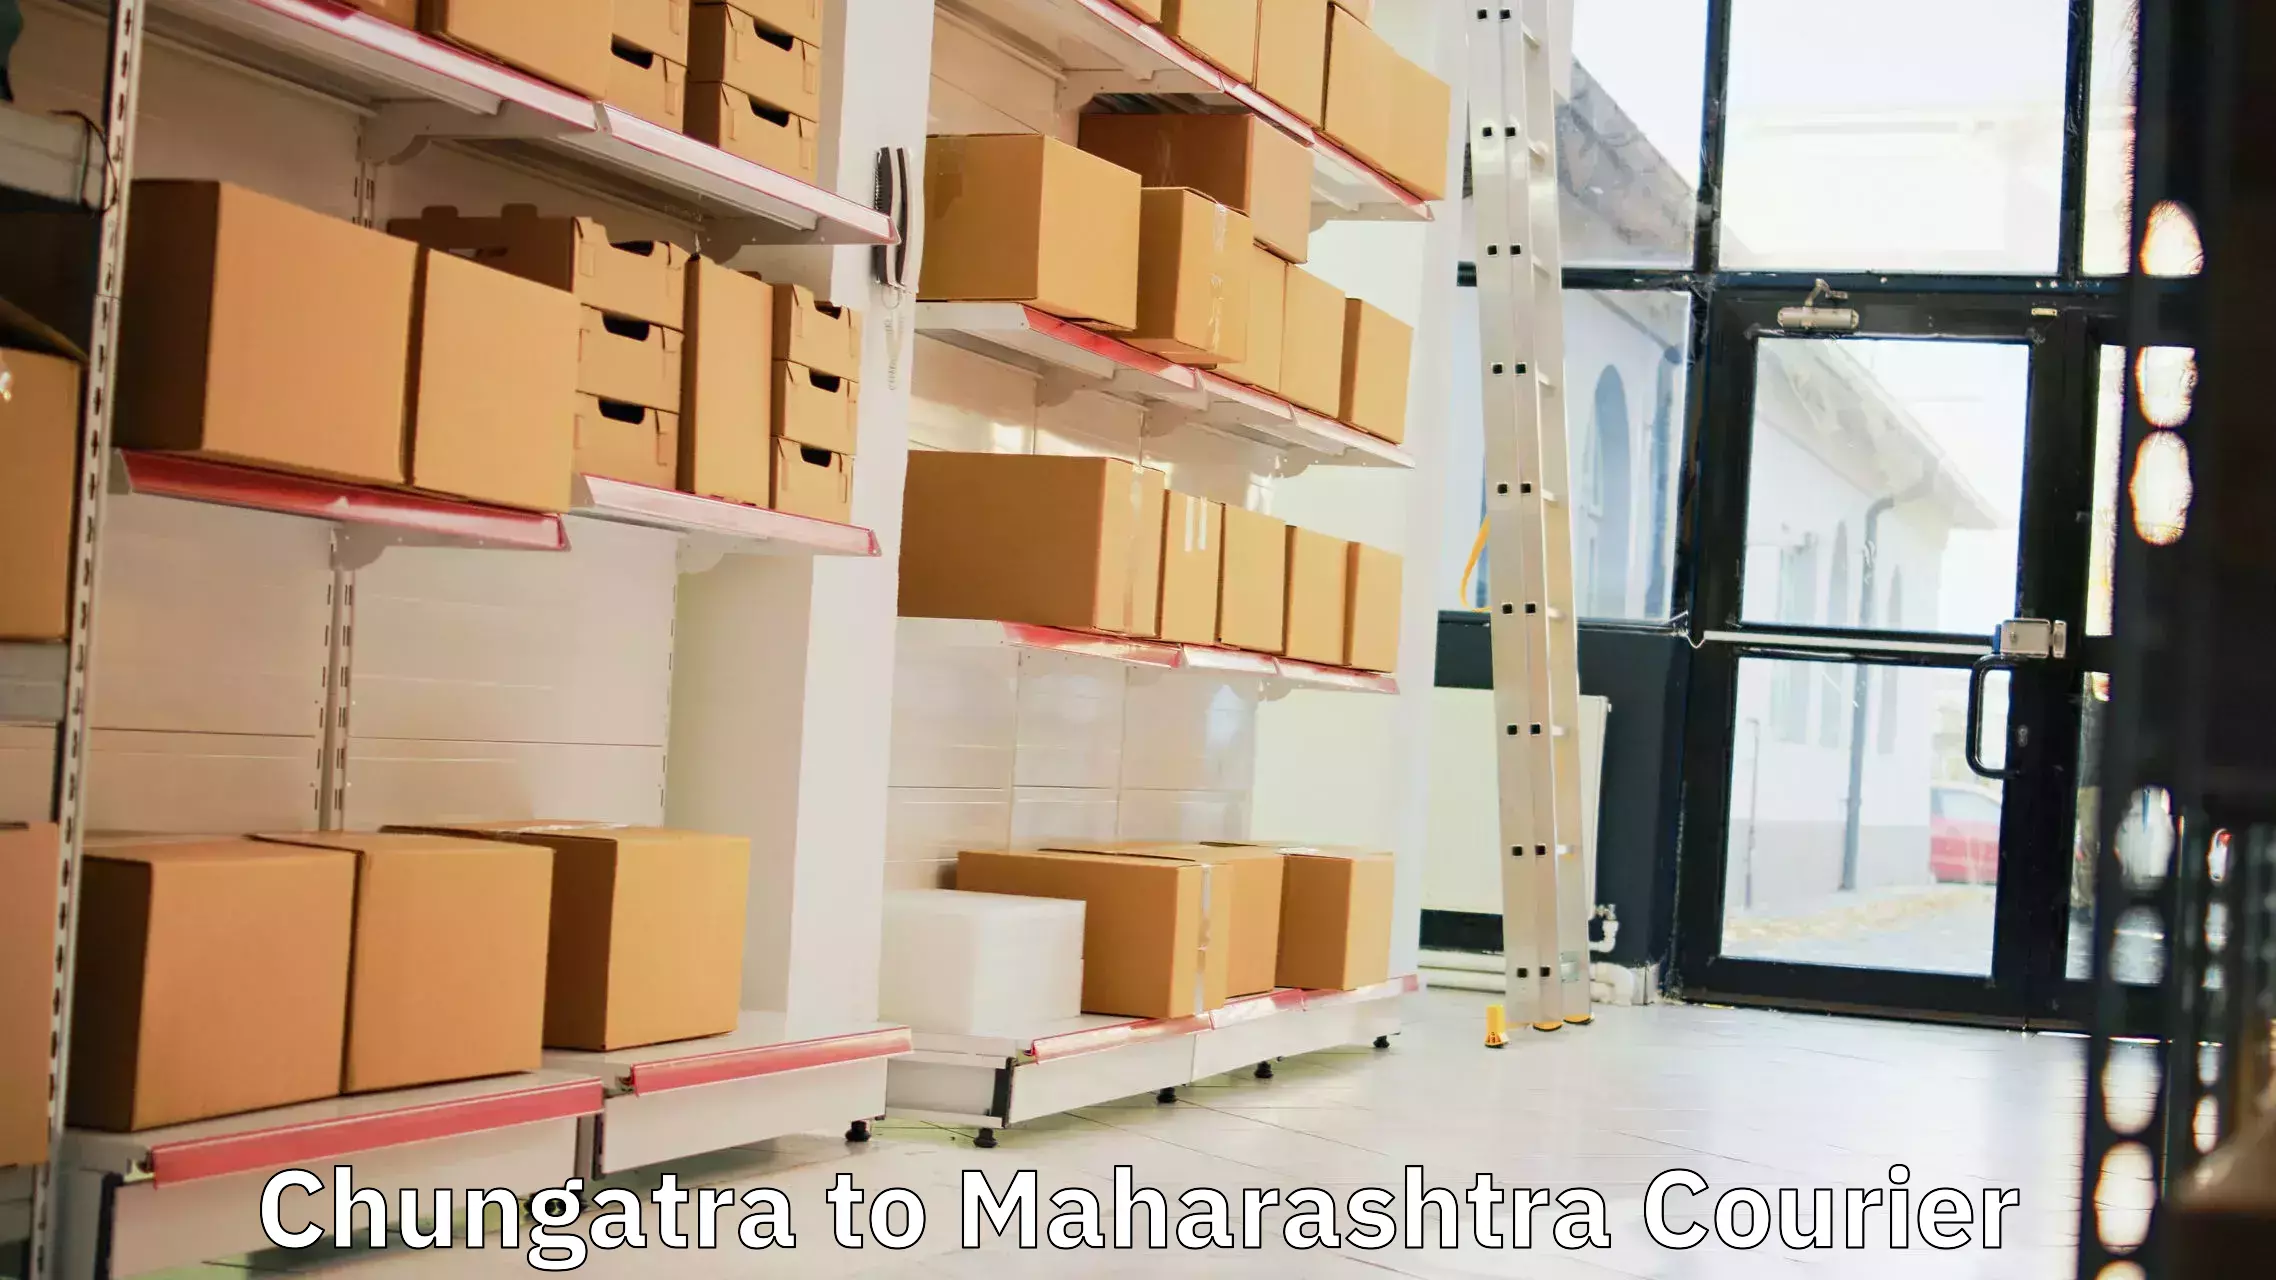 Supply chain delivery Chungatra to Solapur